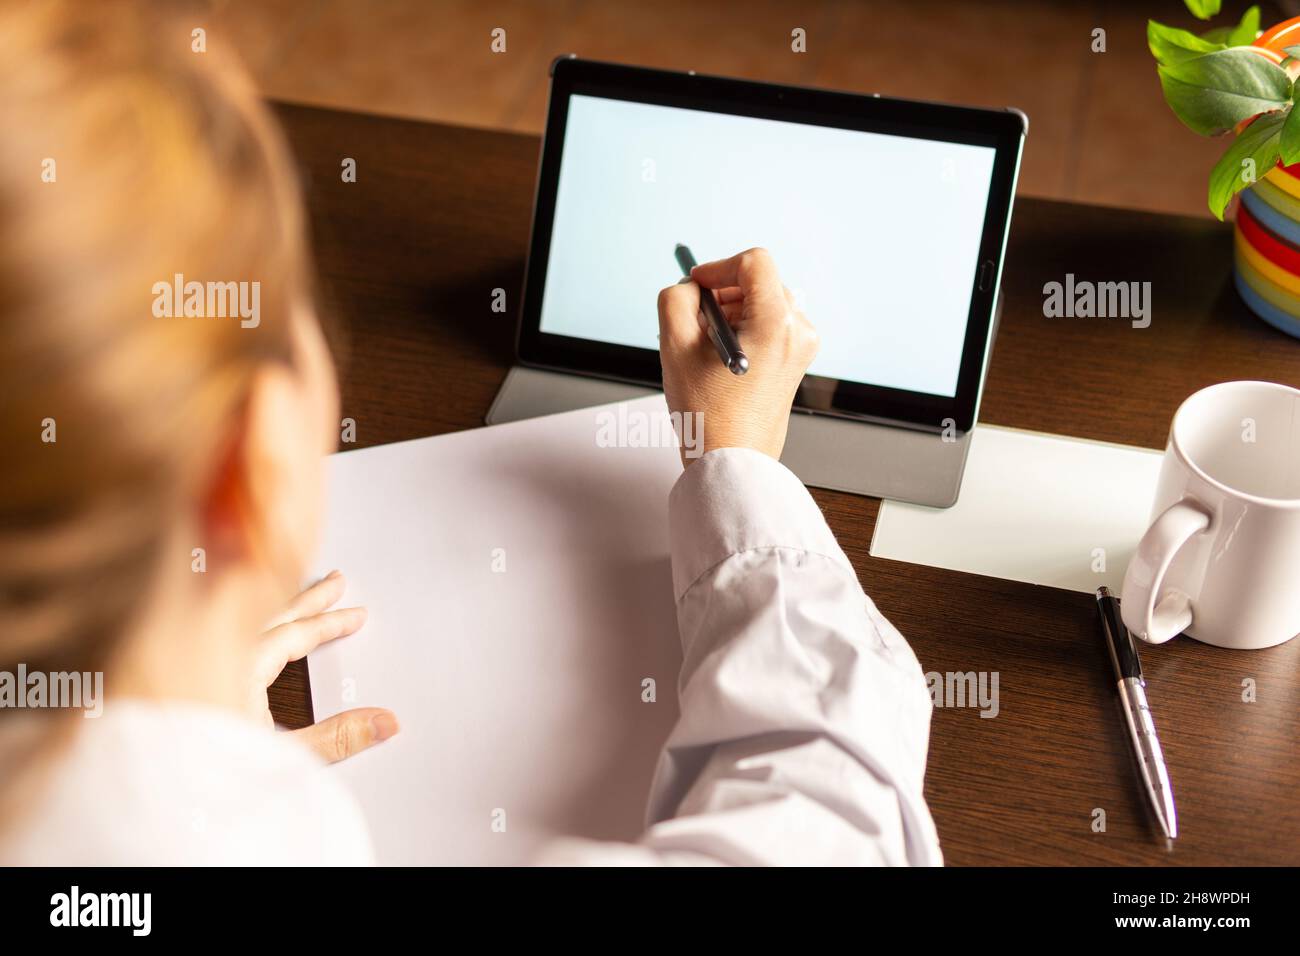 Woman using digital tablet with digital pencil, businesswoman or student. Working from home concept Stock Photo